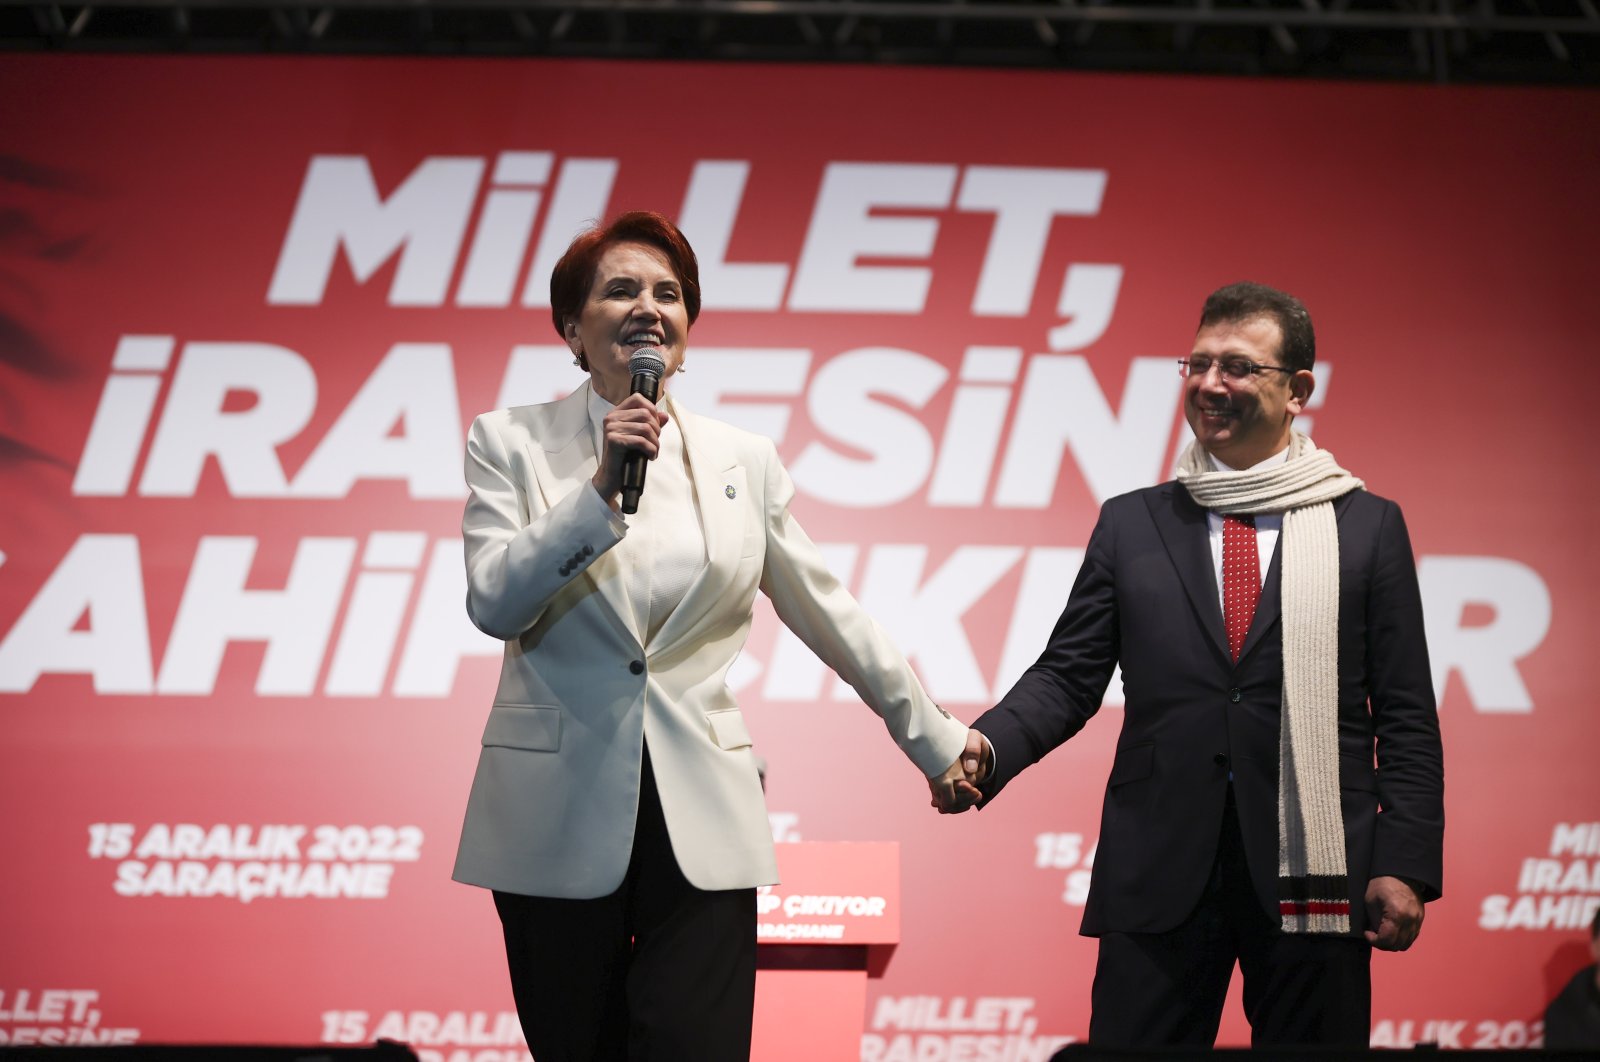 Turkish Good Party (IP) Chairperson Meral Akşener (L) and Istanbul Metropolitan Mayor Ekrem Imamoğlu (R) on stage at an opposition rally in Istanbul, Türkiye, Thursday, Dec. 15, 2022. (AA Photo)